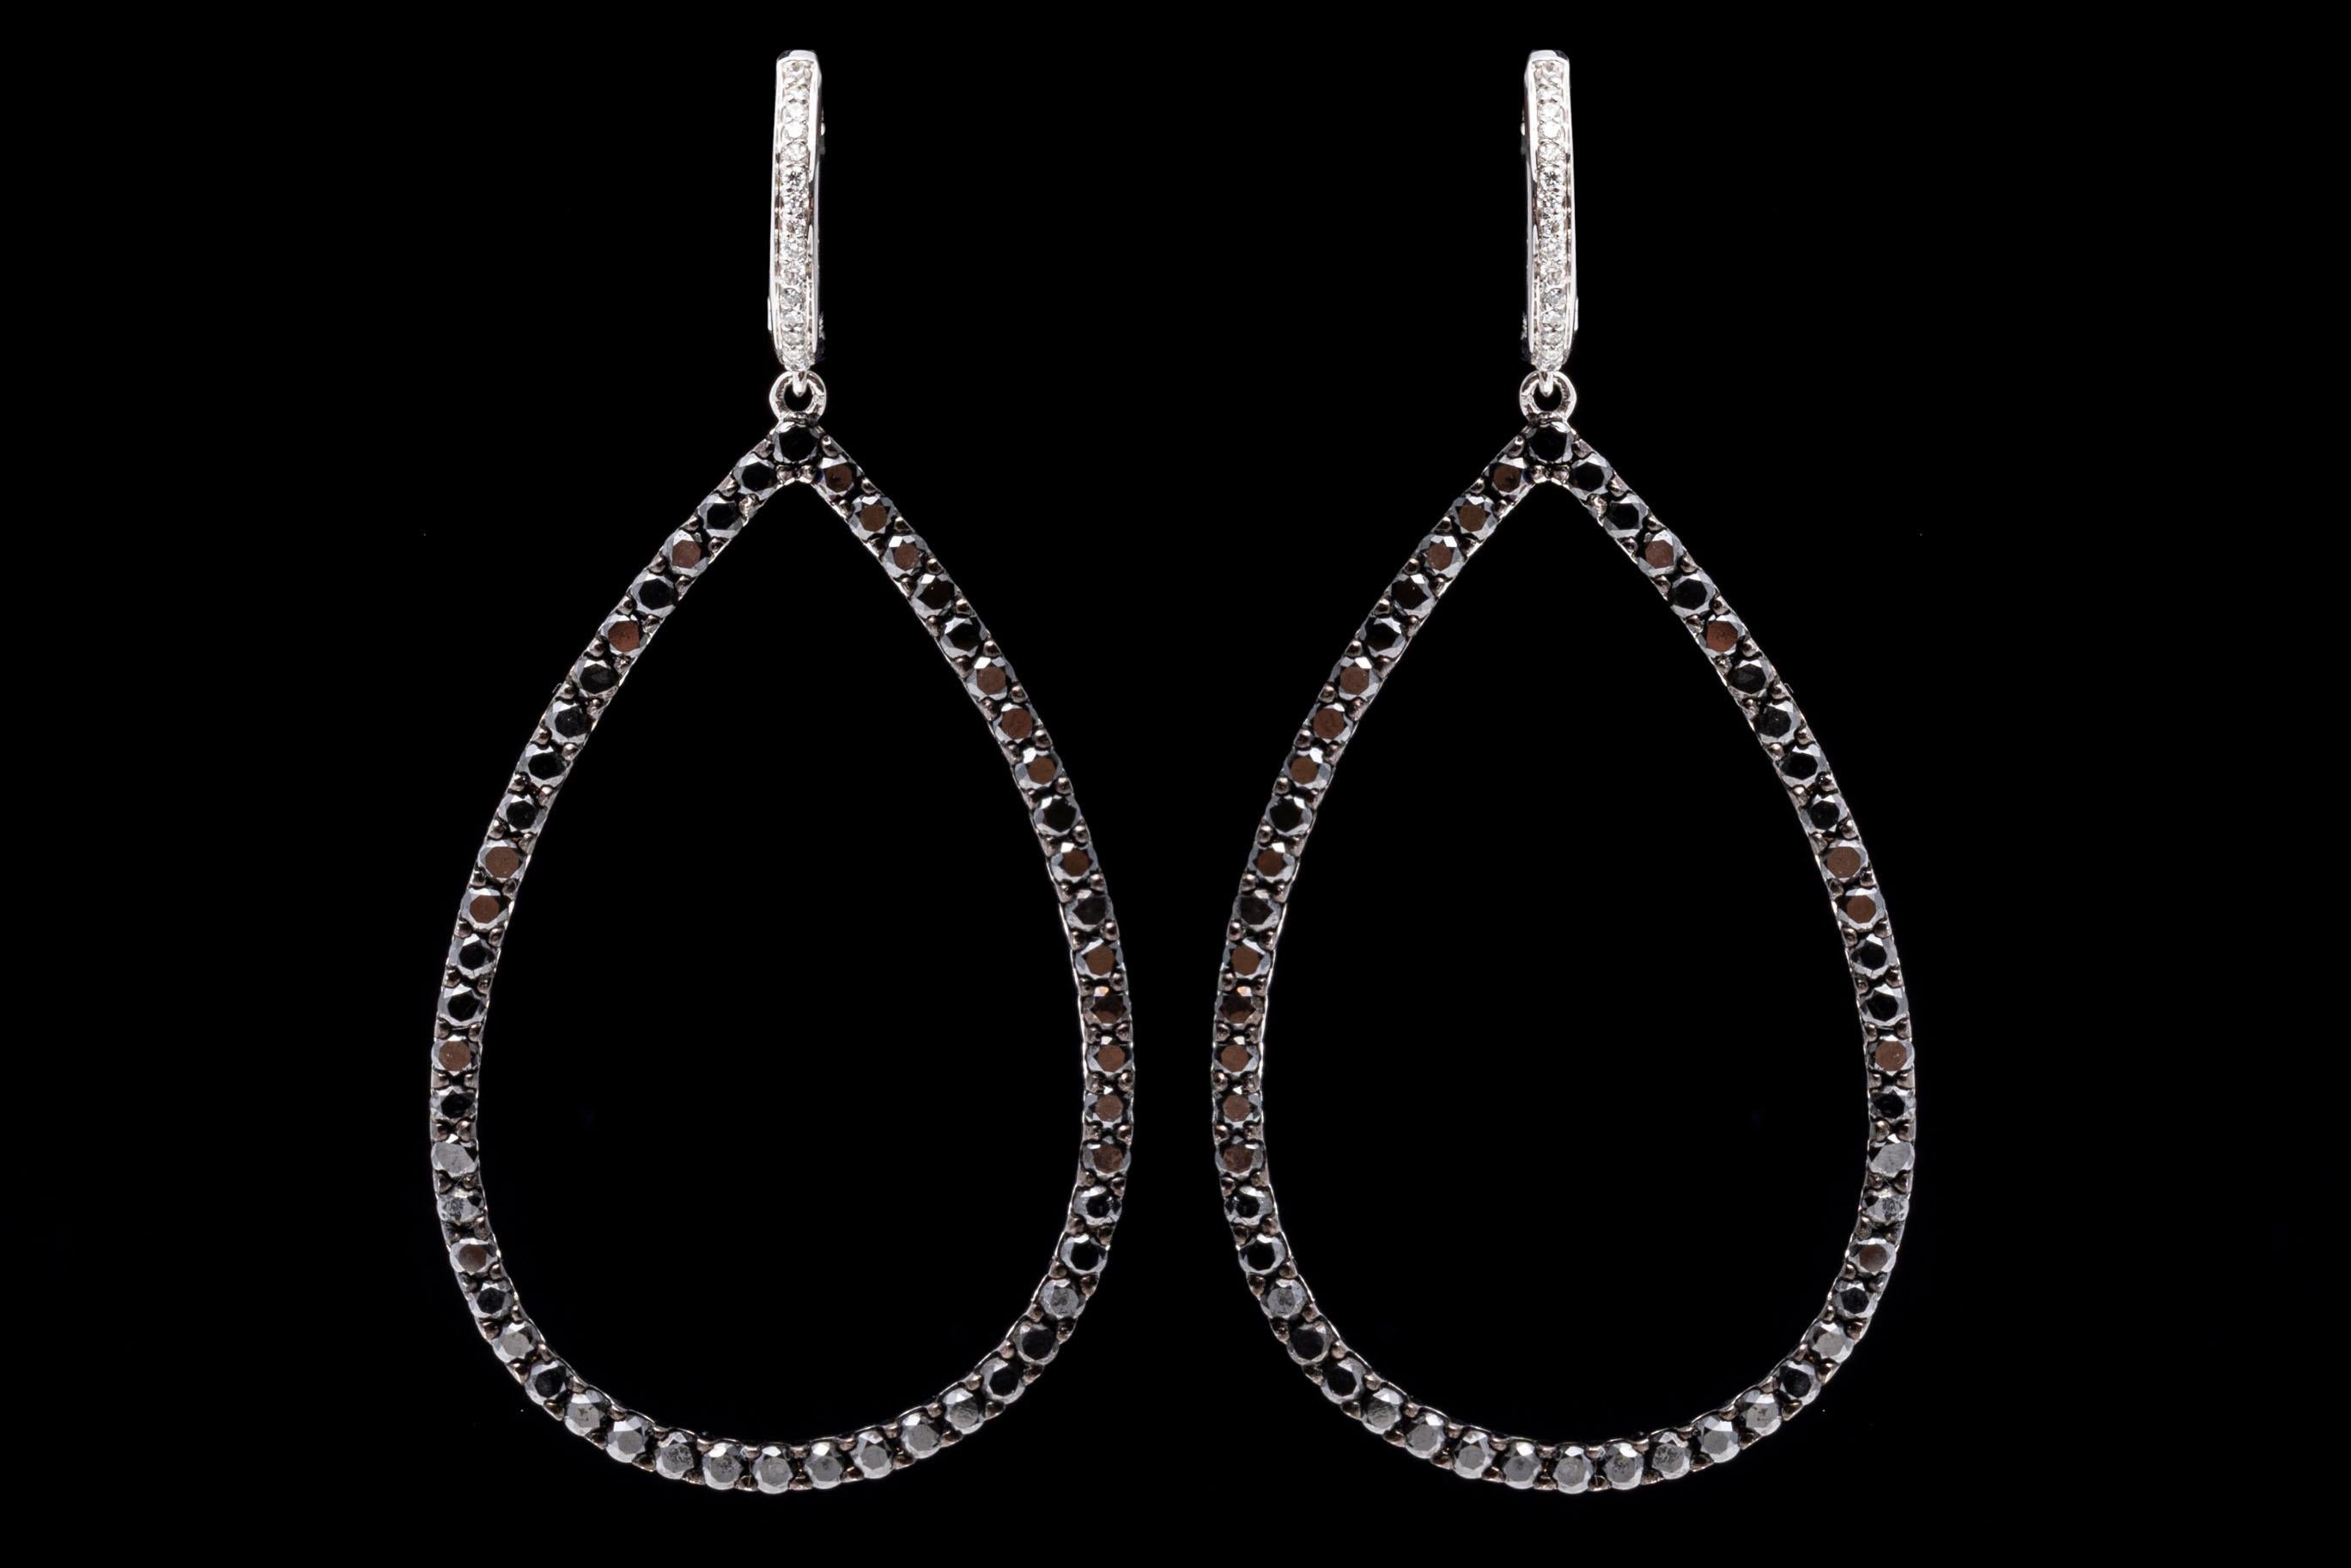 14k White Gold Black and White Diamond Pear Shaped Pendant Earrings, 10.72 TCW For Sale 6